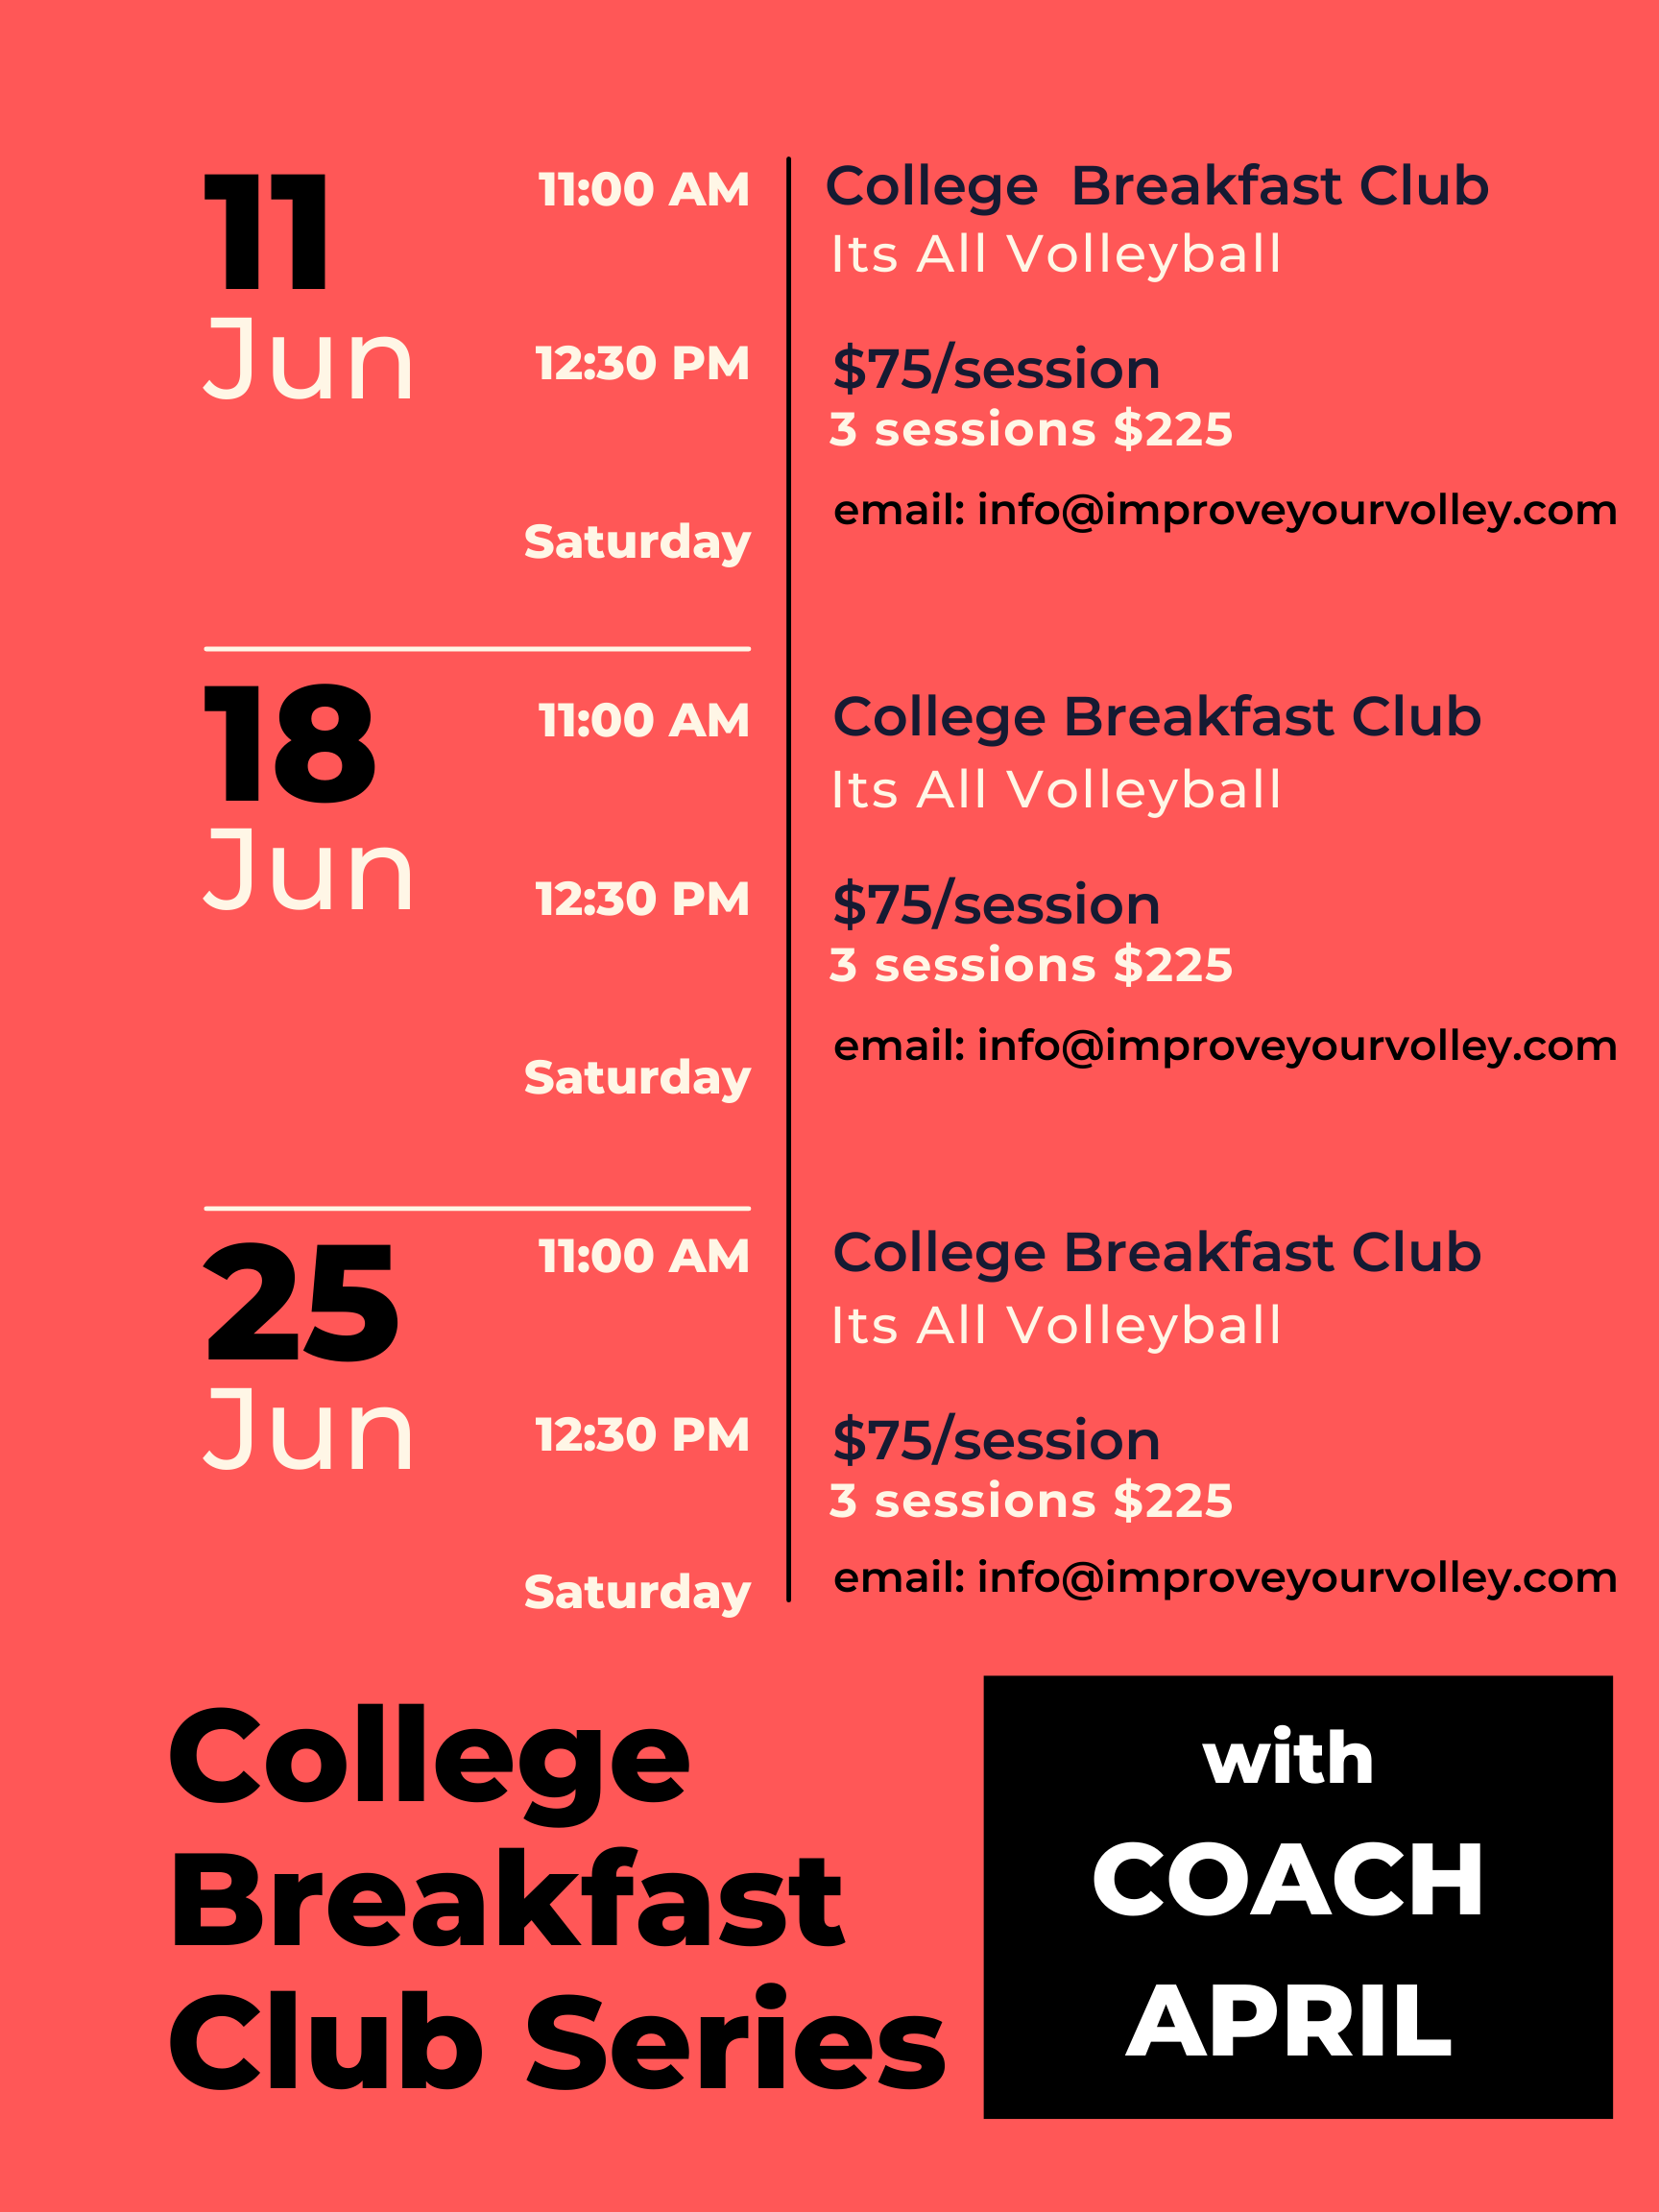 One-on-one or small group rep training or volleyball workout with a  "Pay As You Go” solution for experienced players who register the fall/winter season.